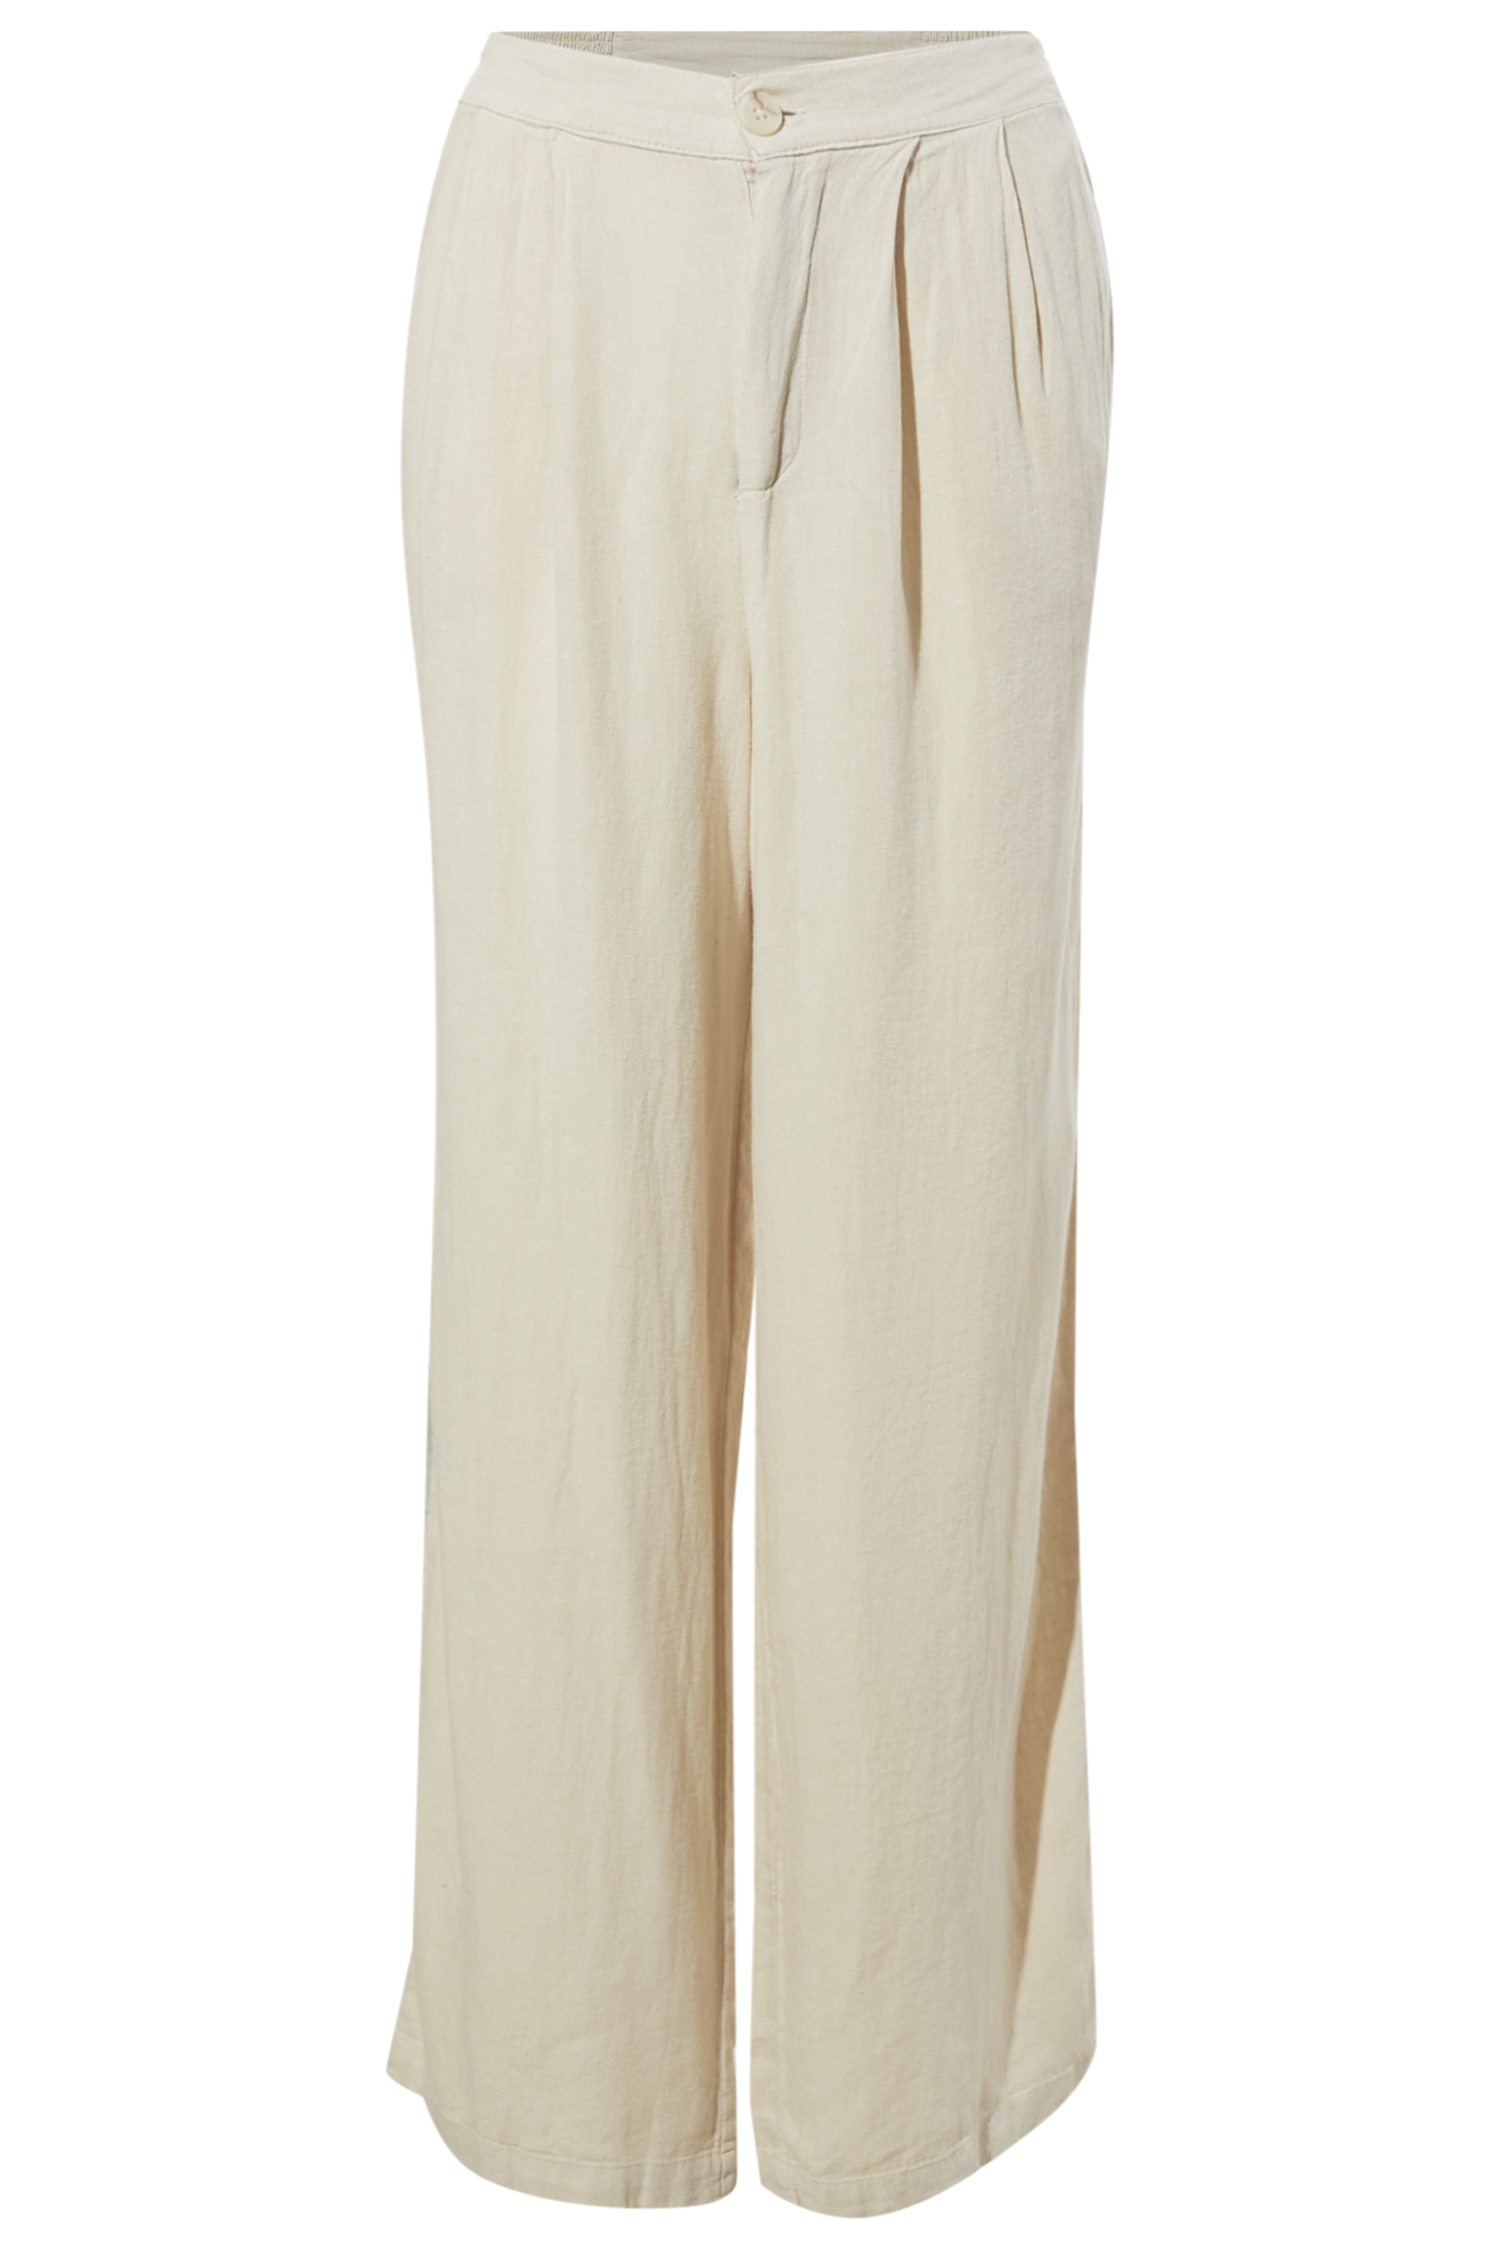 Thread & Supply High Rise Trousers